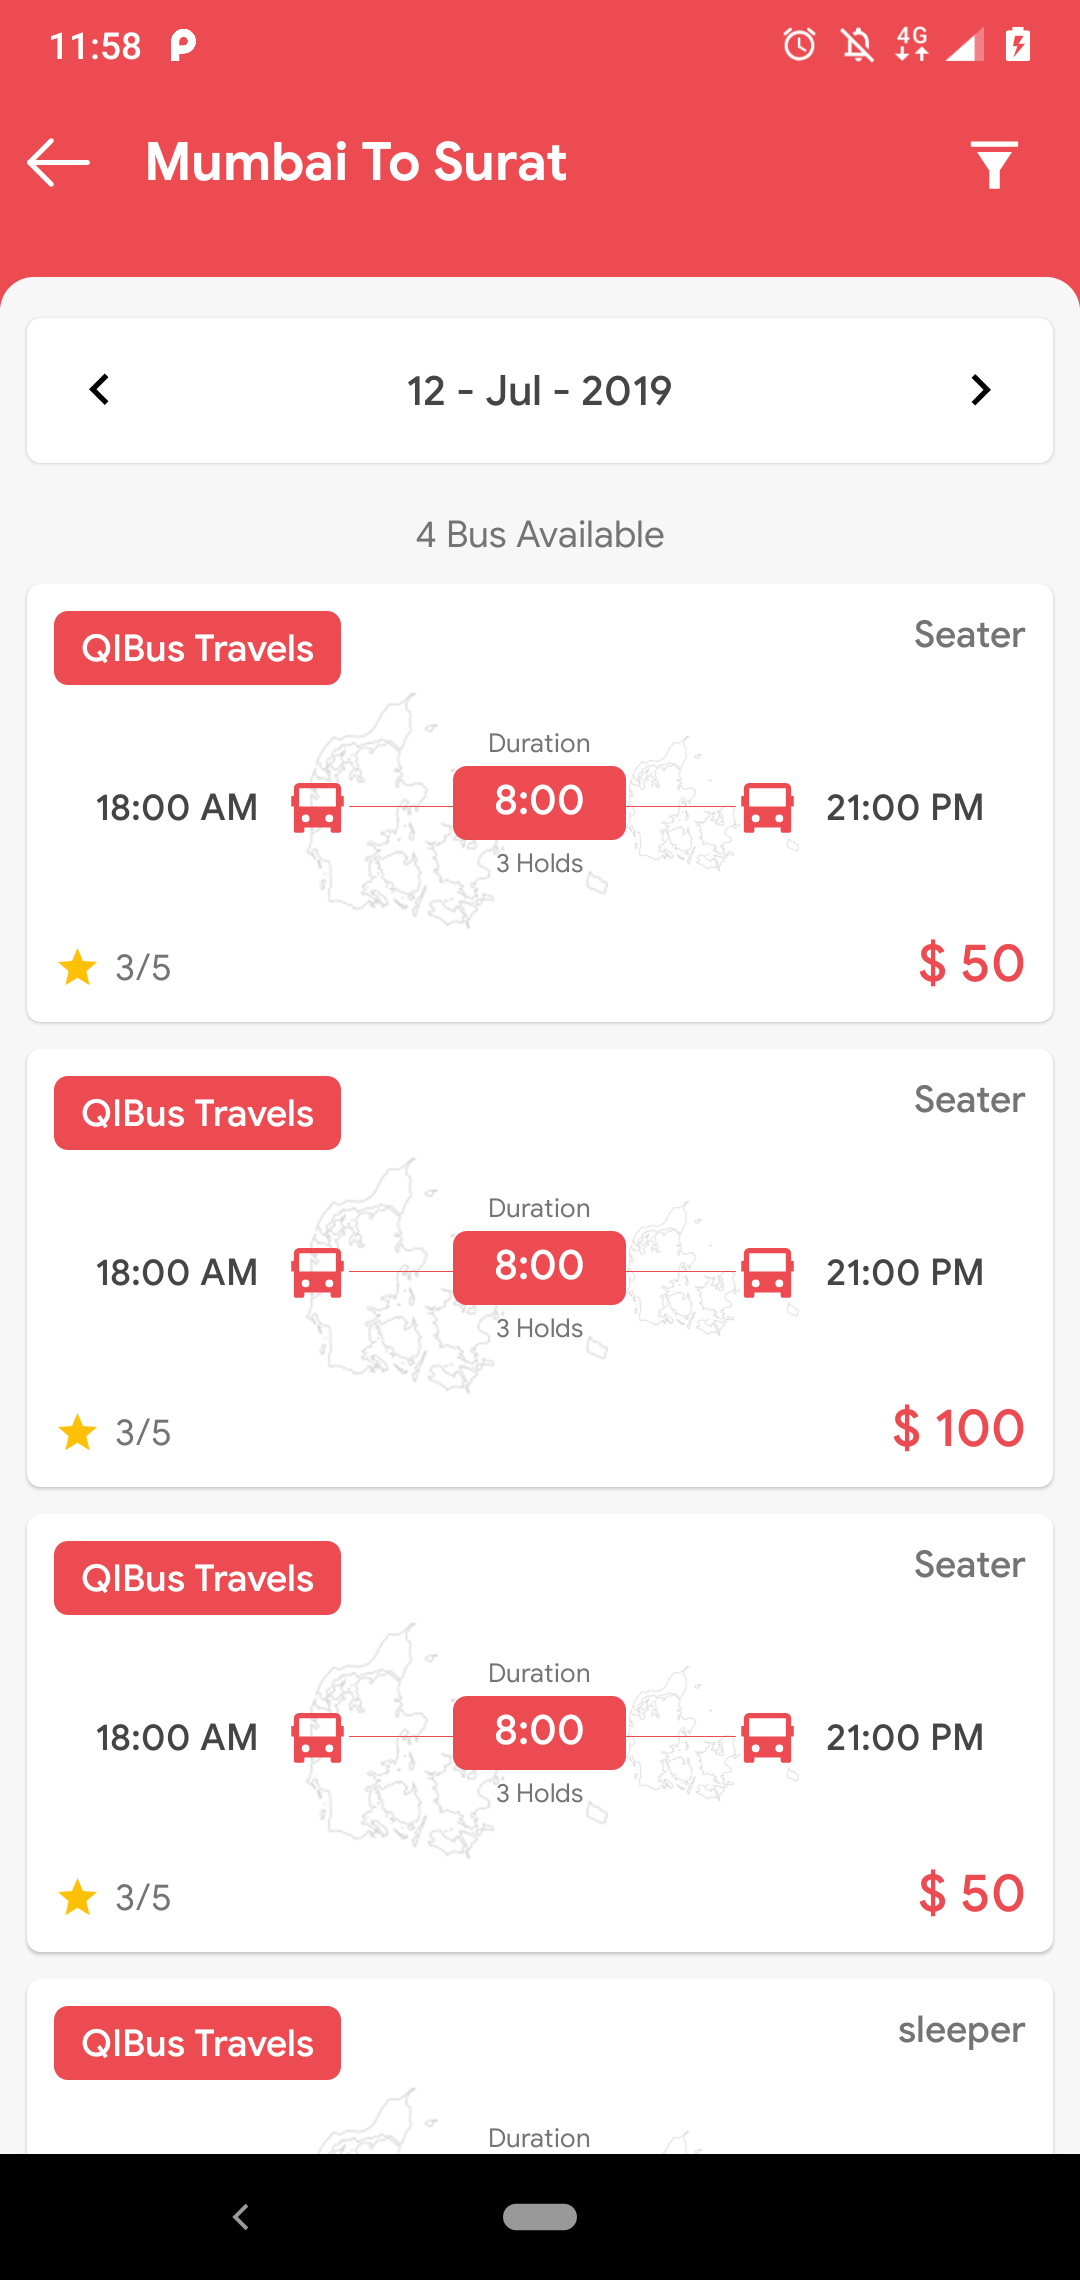 QIBus- Bus booking android app ui template